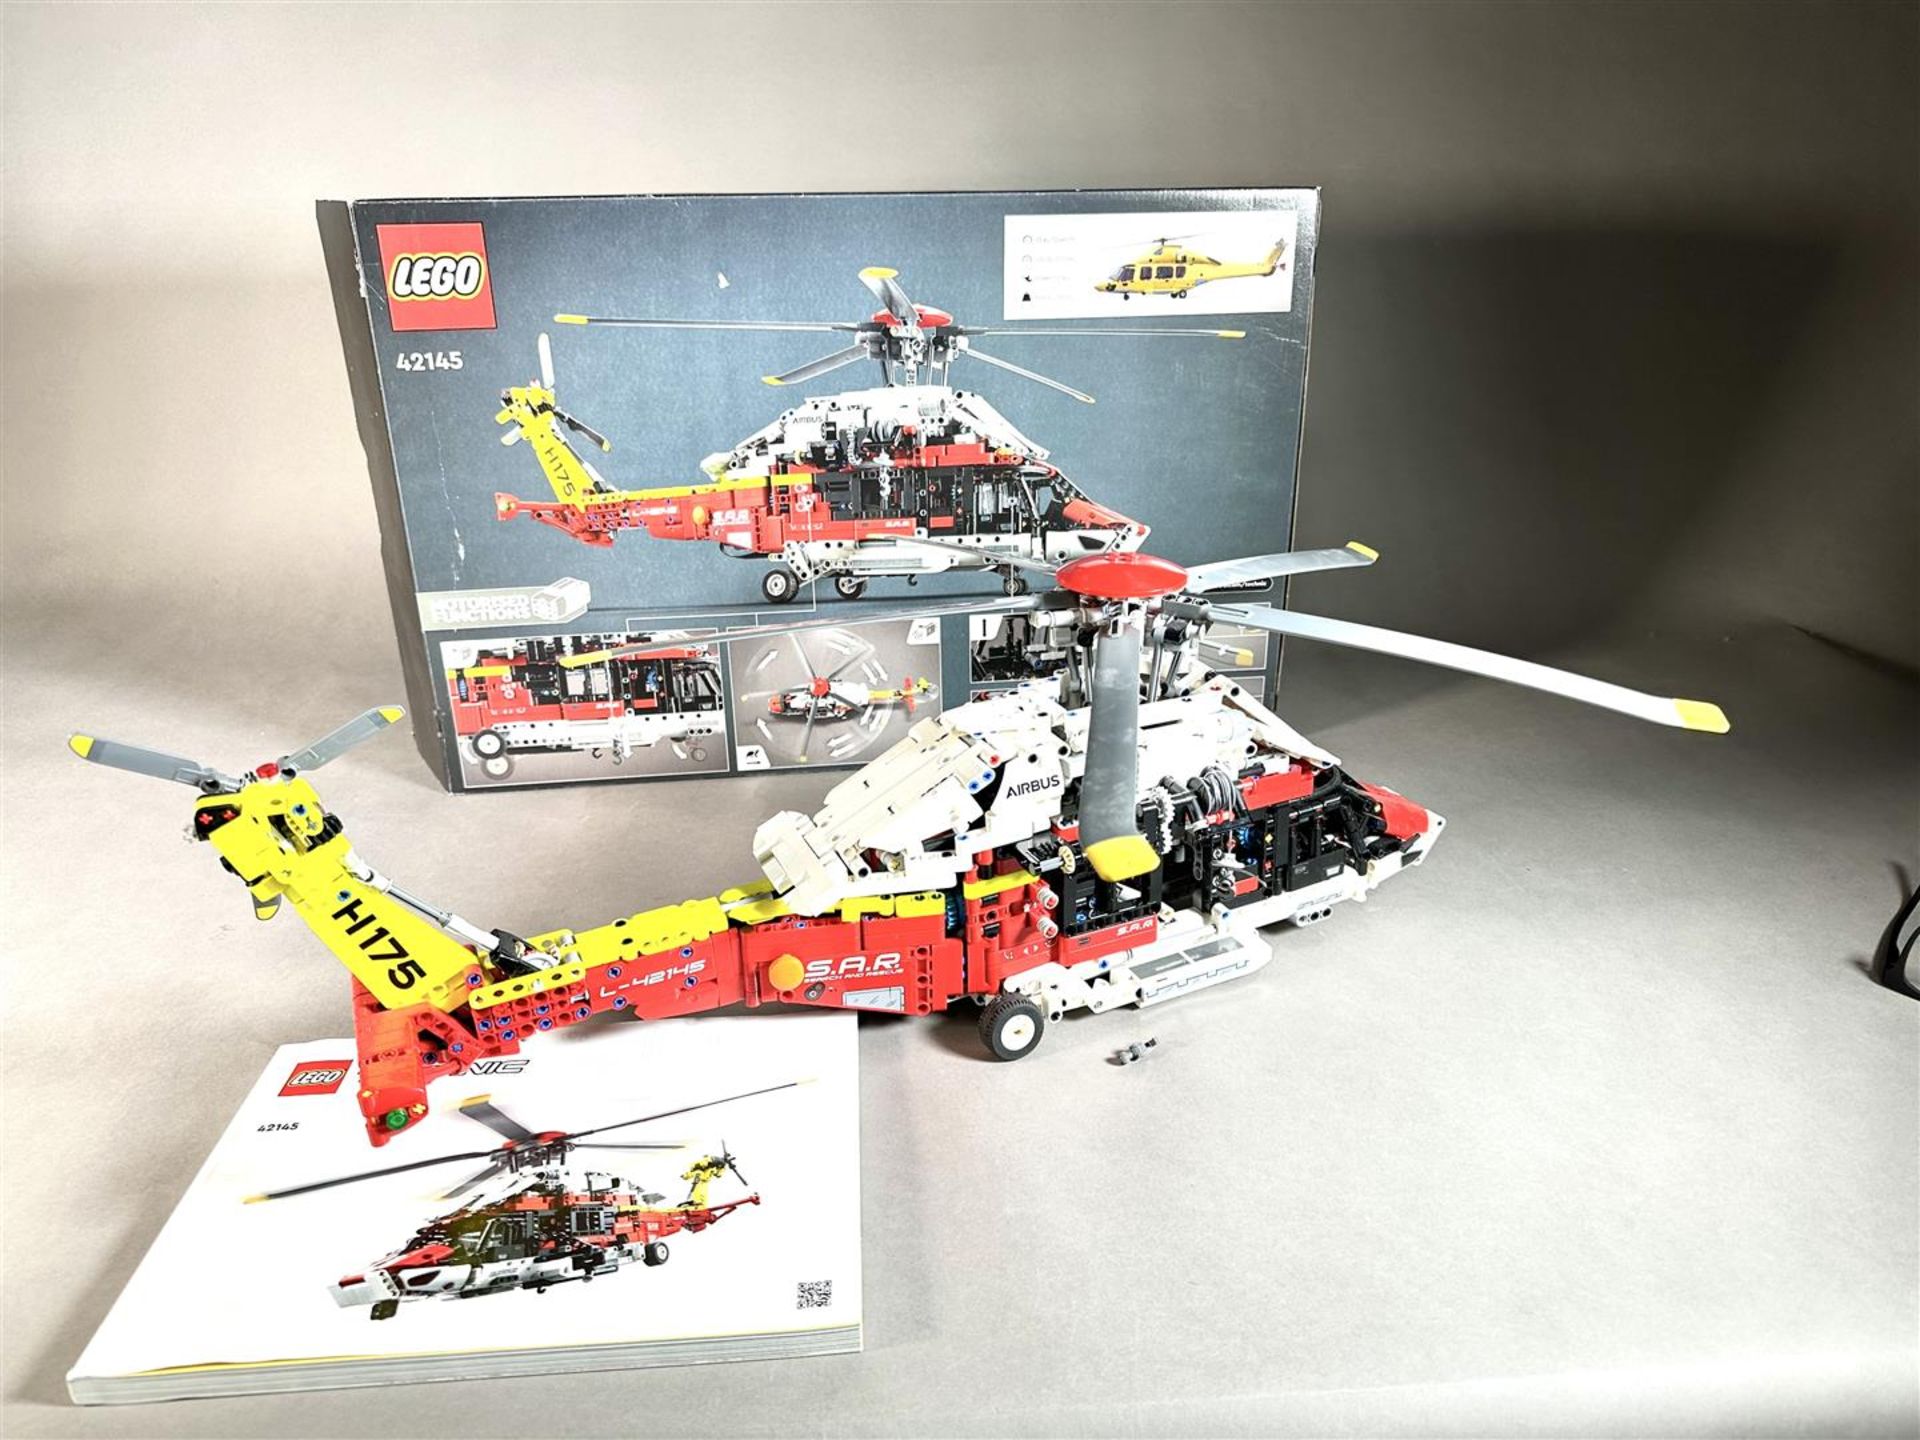 Lego - Technic - 42145 - Helicopter Exclusive Airbus H175 Rescue Helicopter - 2000-present